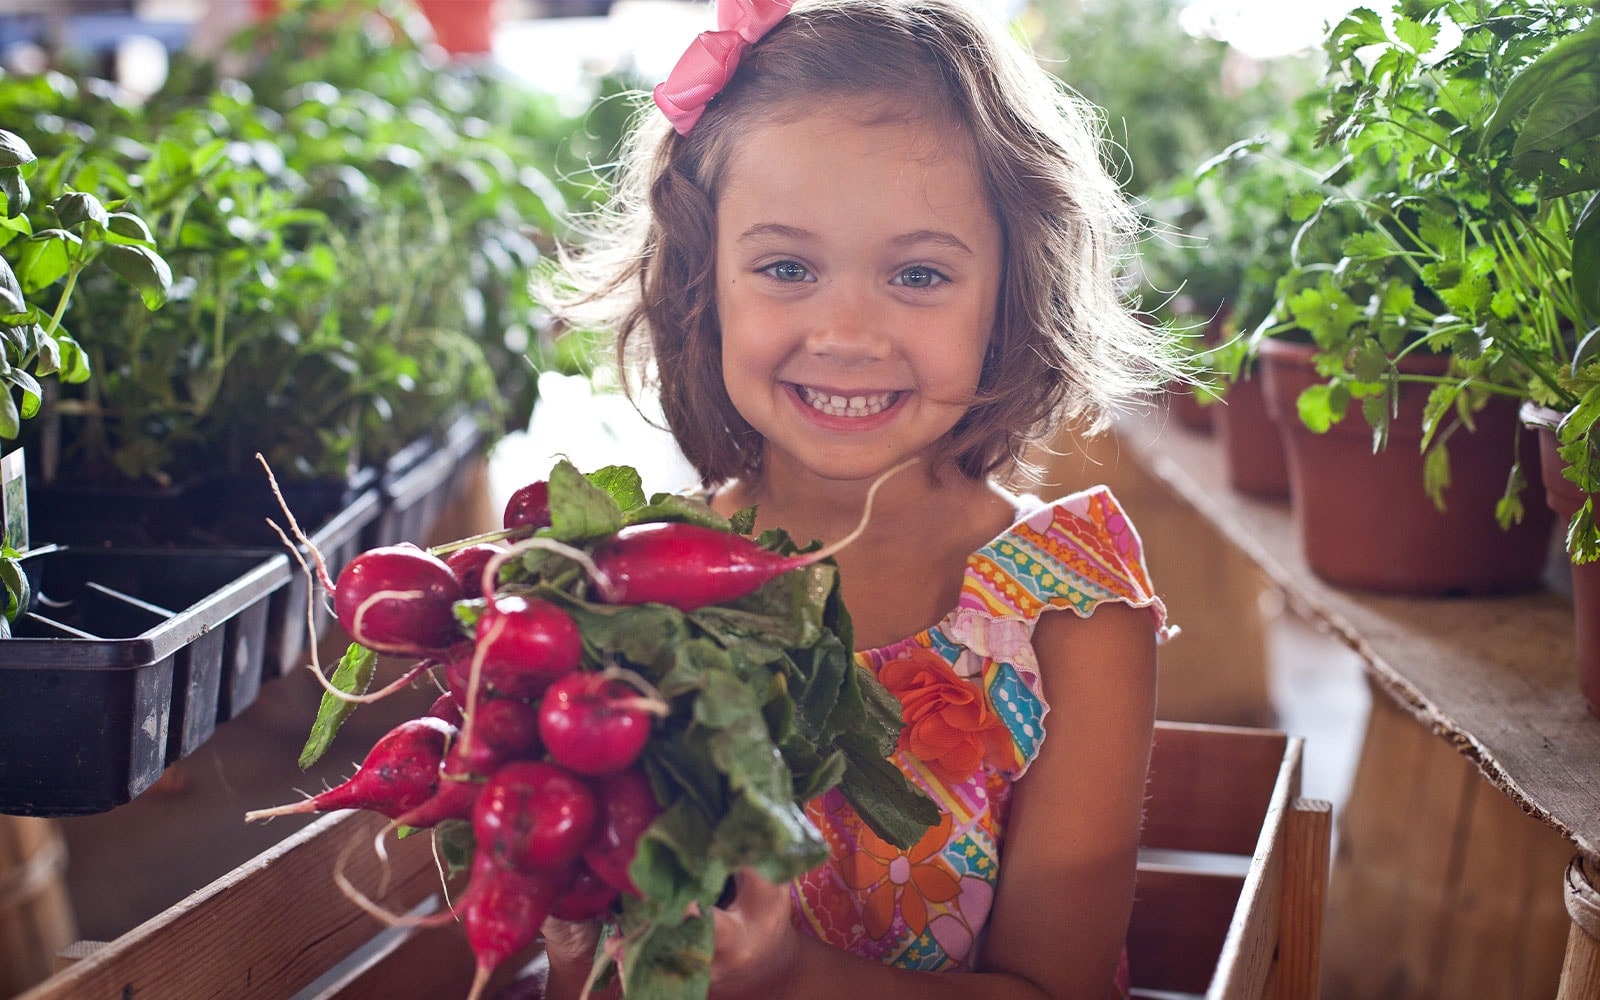 A small girl with a bow in her hair smiling and holding a bunch of radishes at a farmer's market.